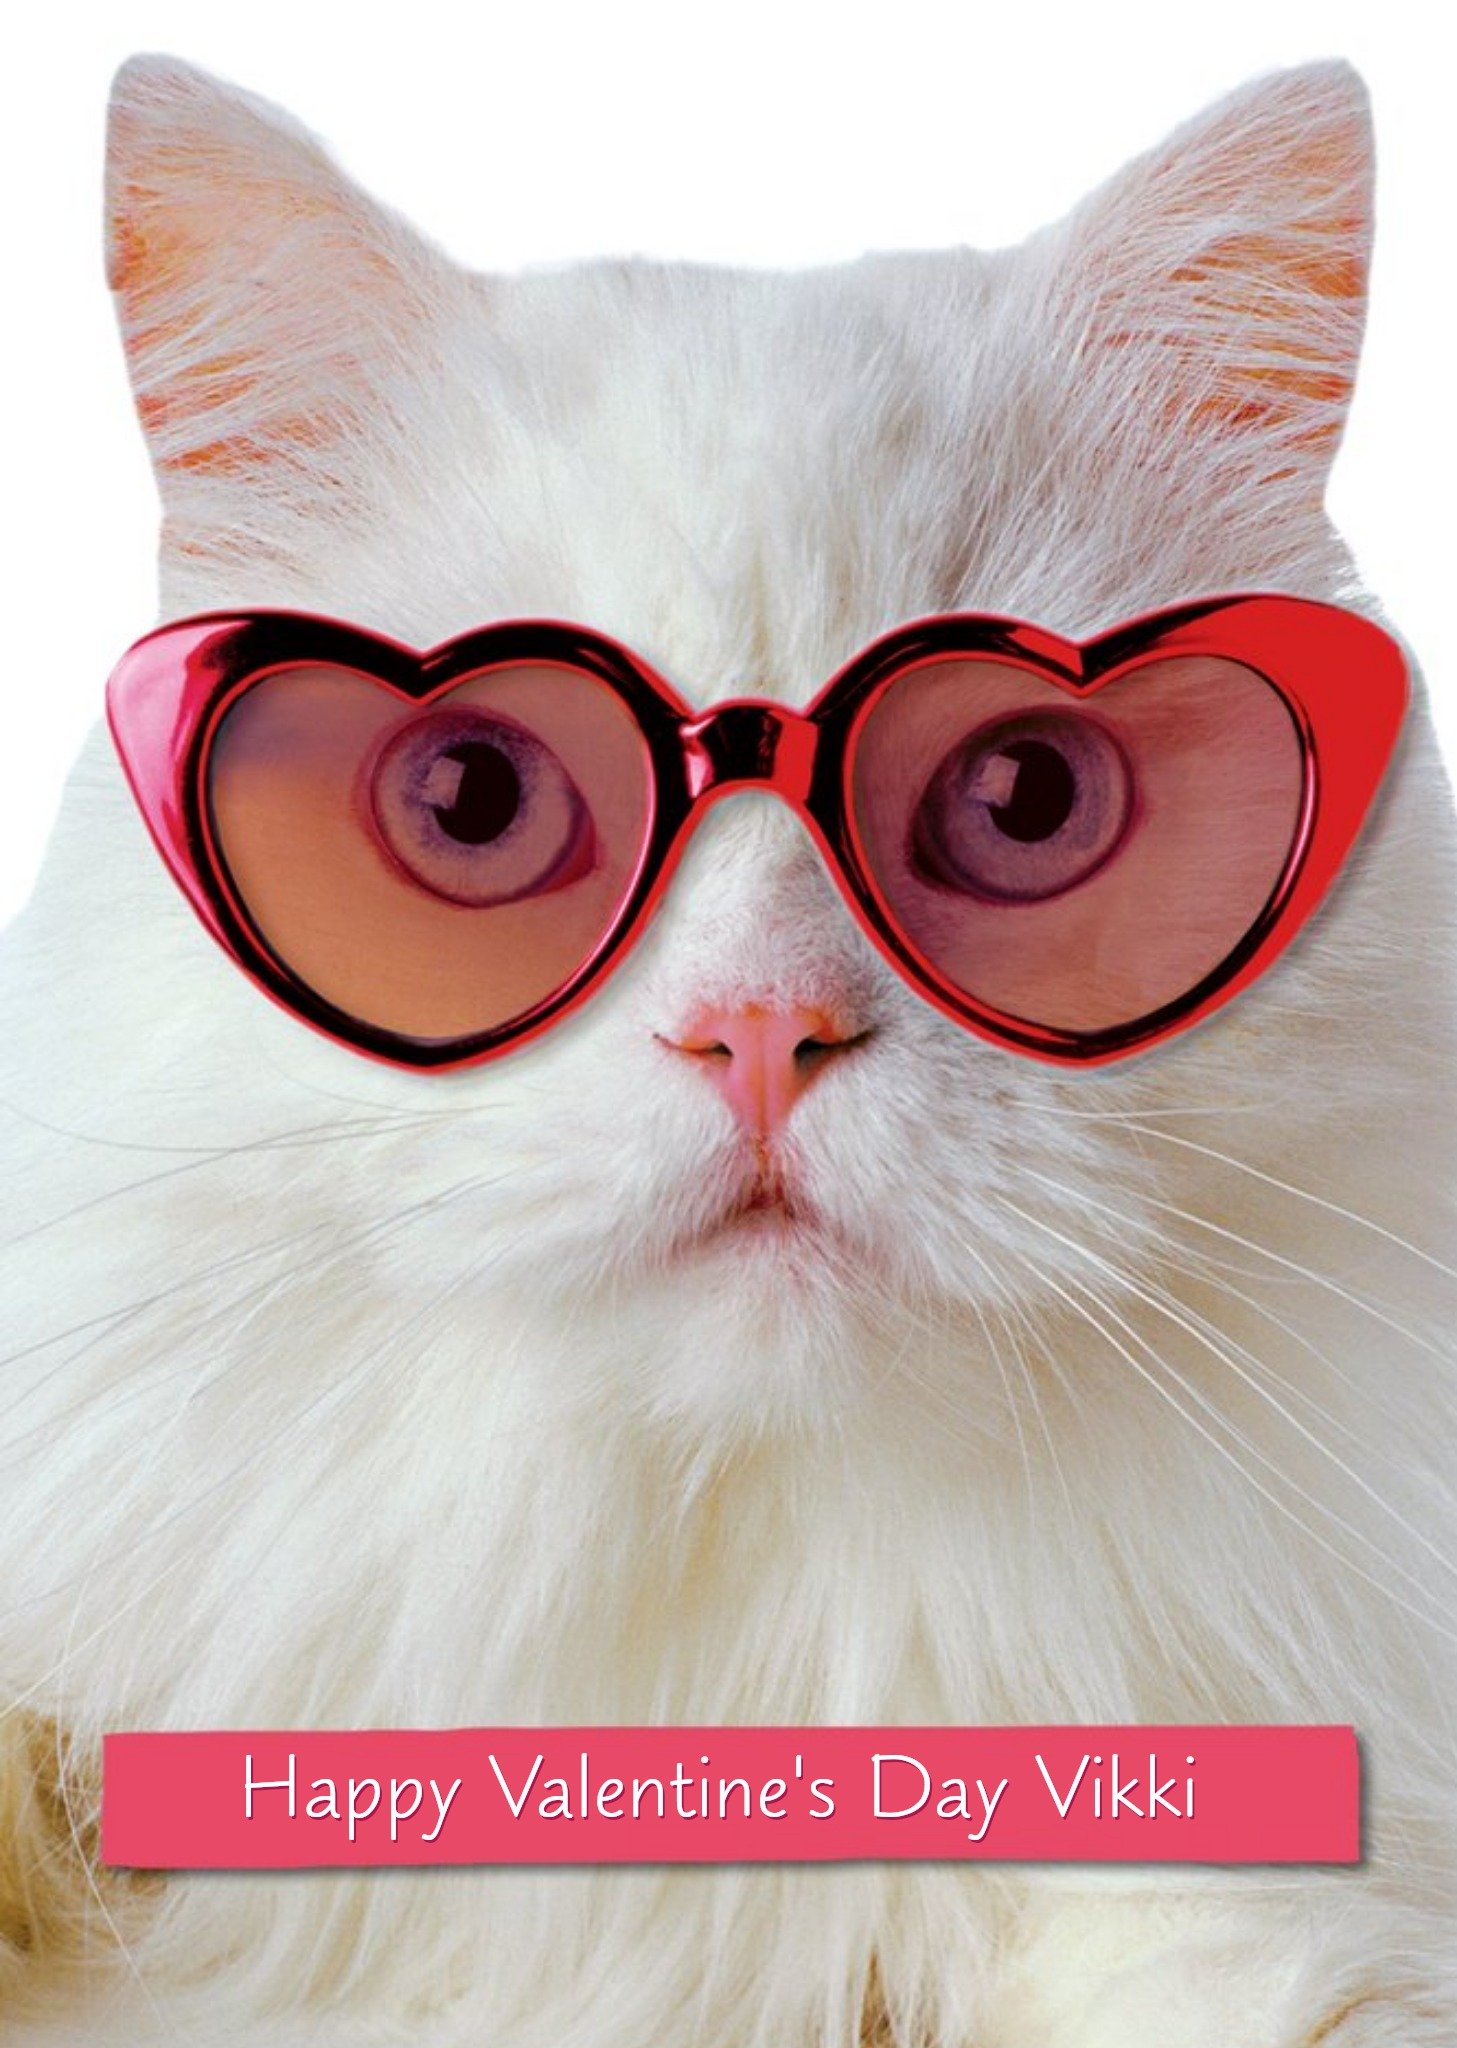 Moonpig White Cat Wearing Heart Sunglasses Personalised Valentine's Day Card, Large